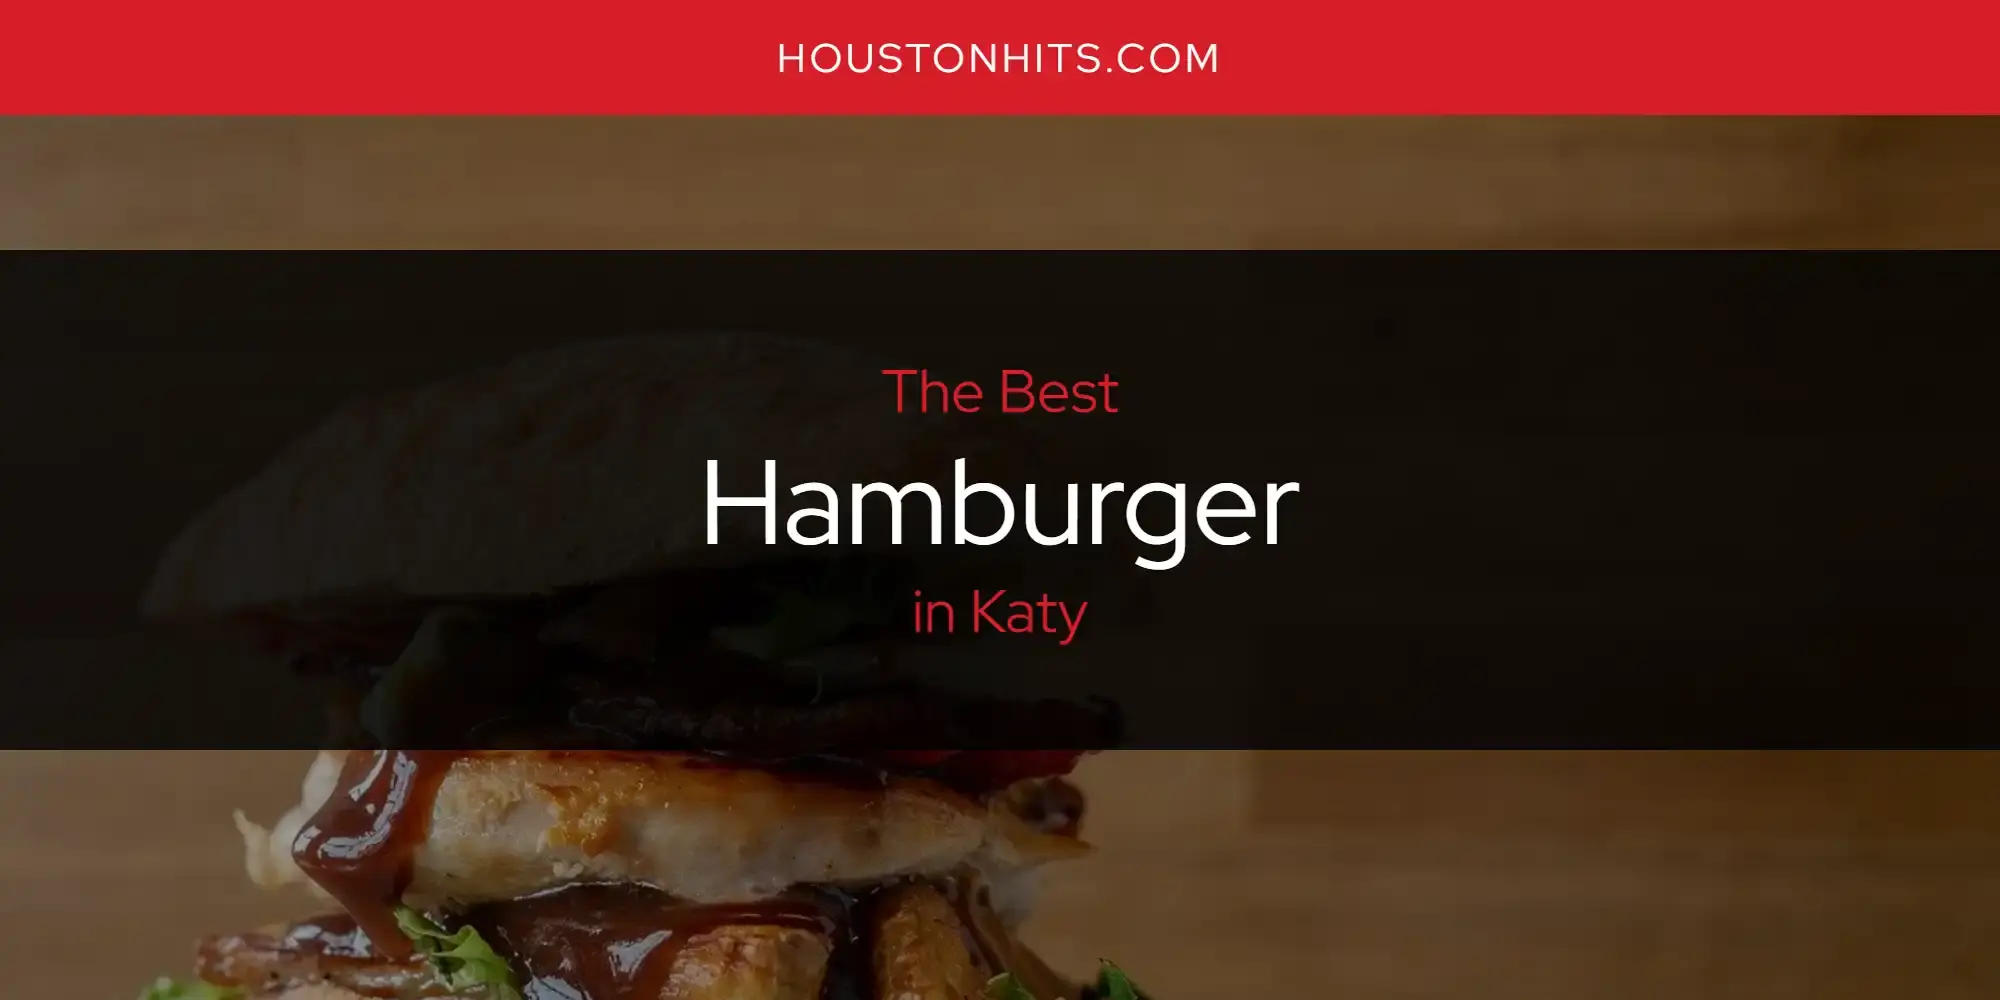 Best Hamburger in Katy? Here's the Top 17